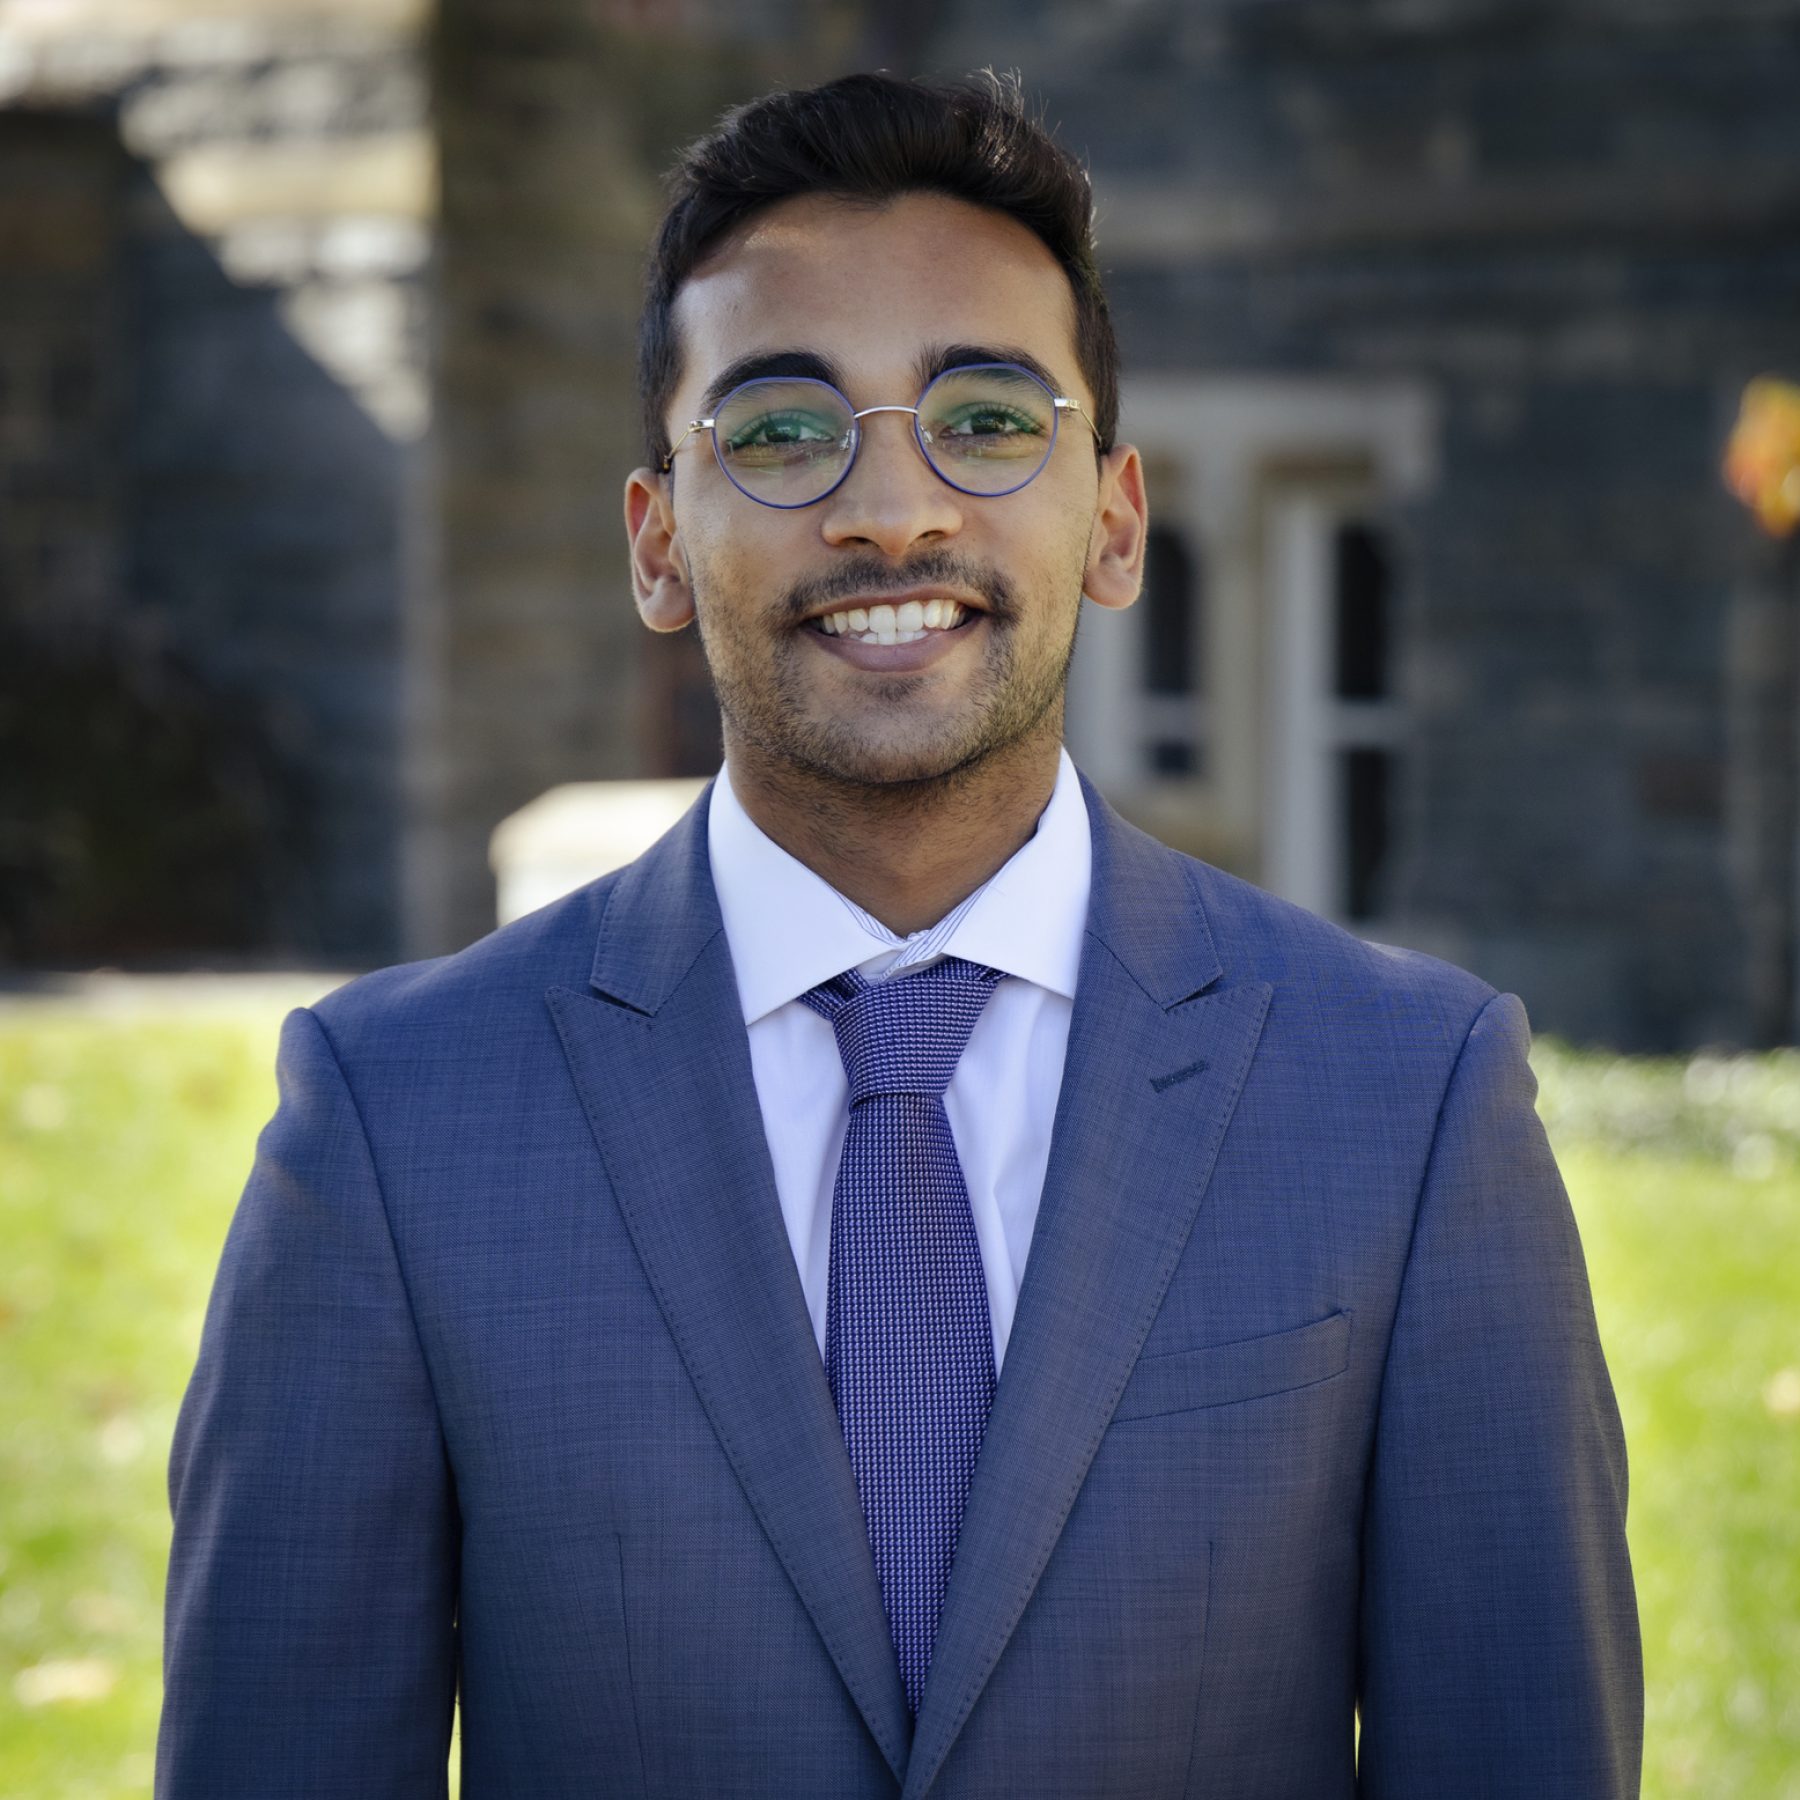 Arjun Ravi wears glasses and a light blue suit for a headshot outside